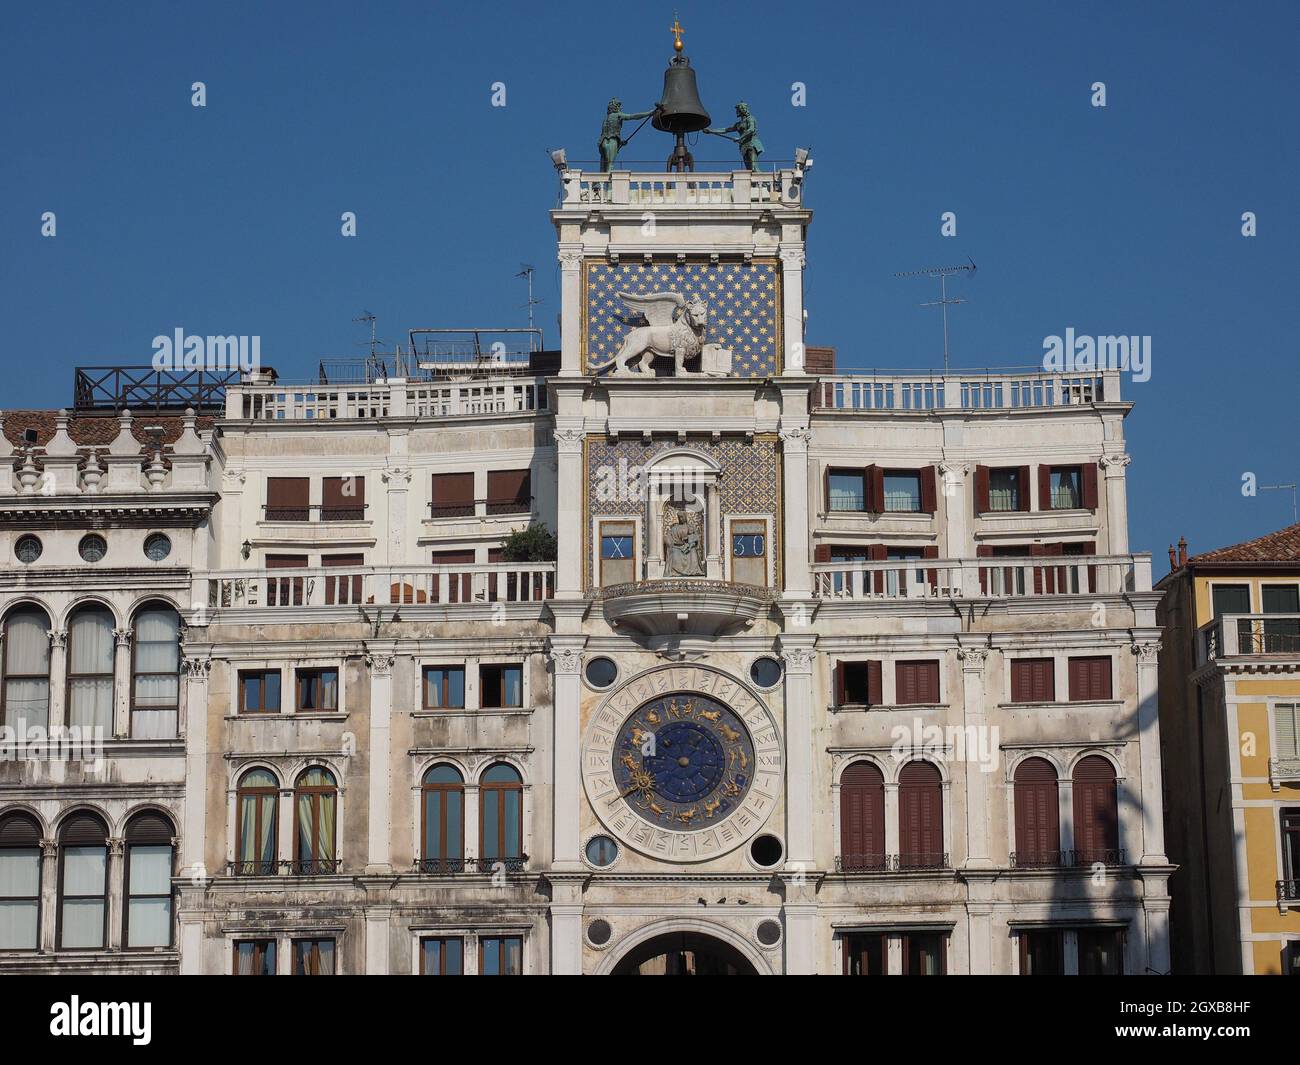 Torre dell Orologio (meaning Clock Tower) in San Marco square in Venice, Italy. Stock Photo